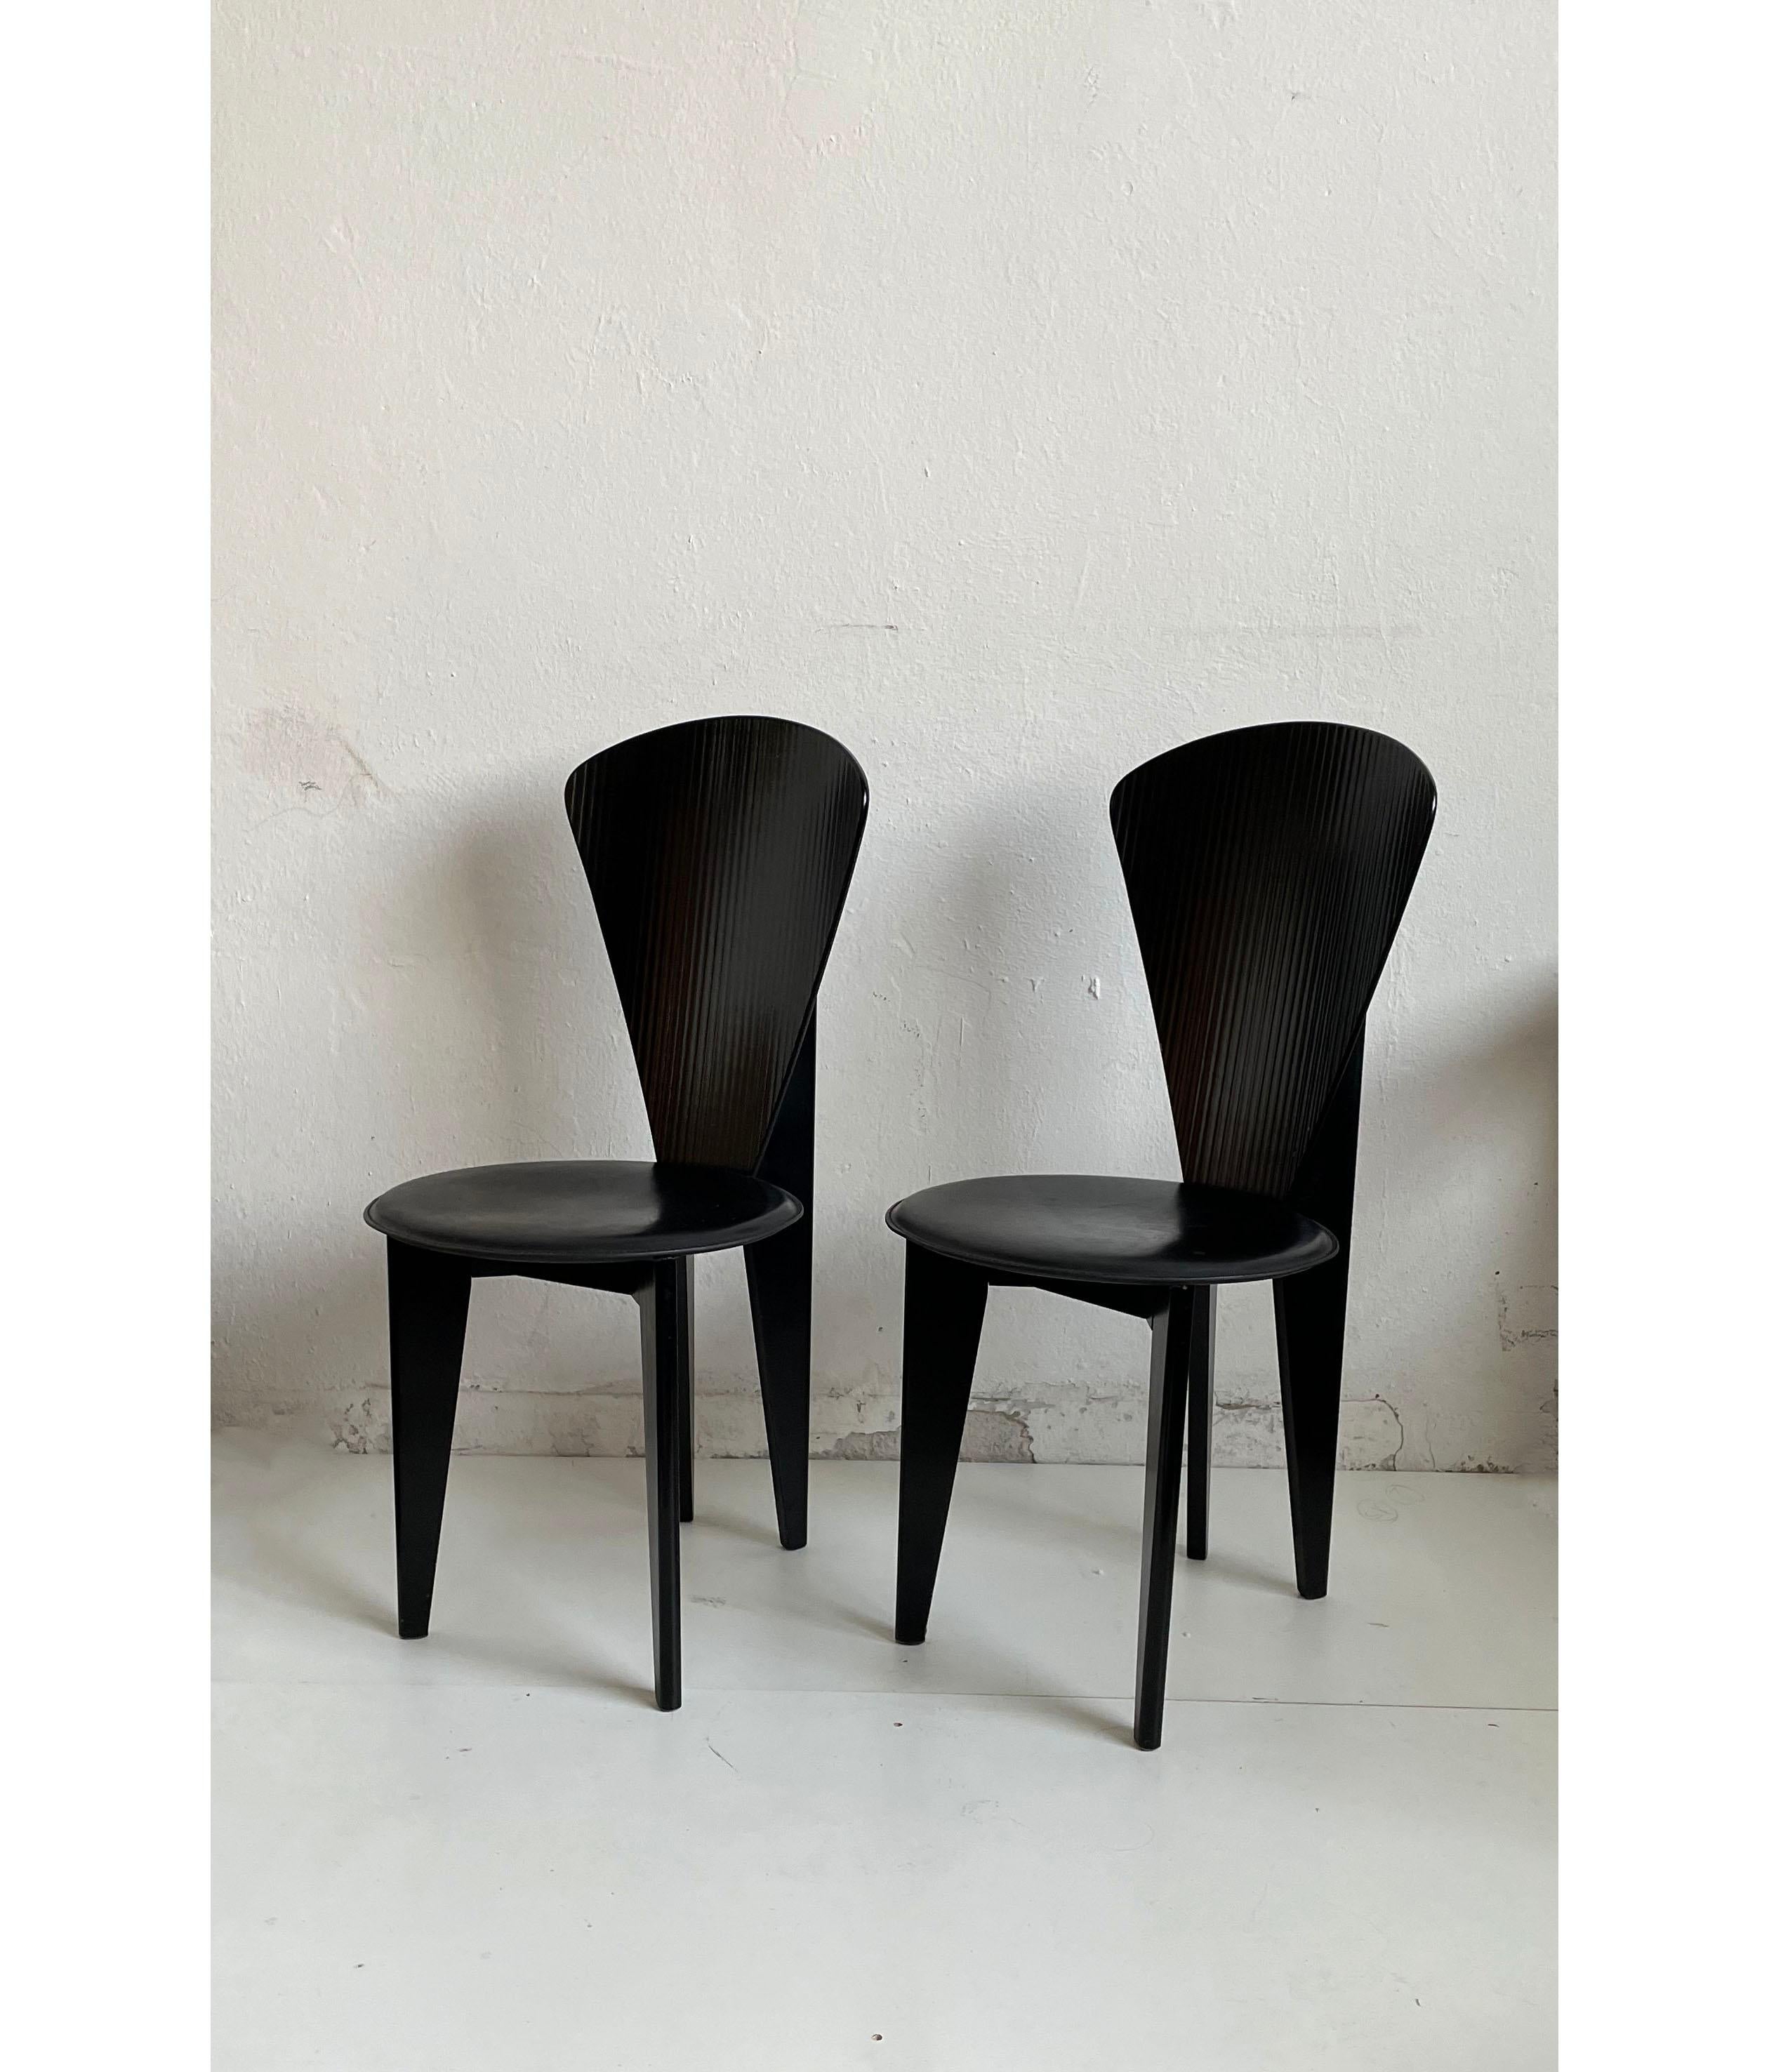 Postmodern Italian Calligaris Dining Chairs, Black Leather and Wood, 1980s 1